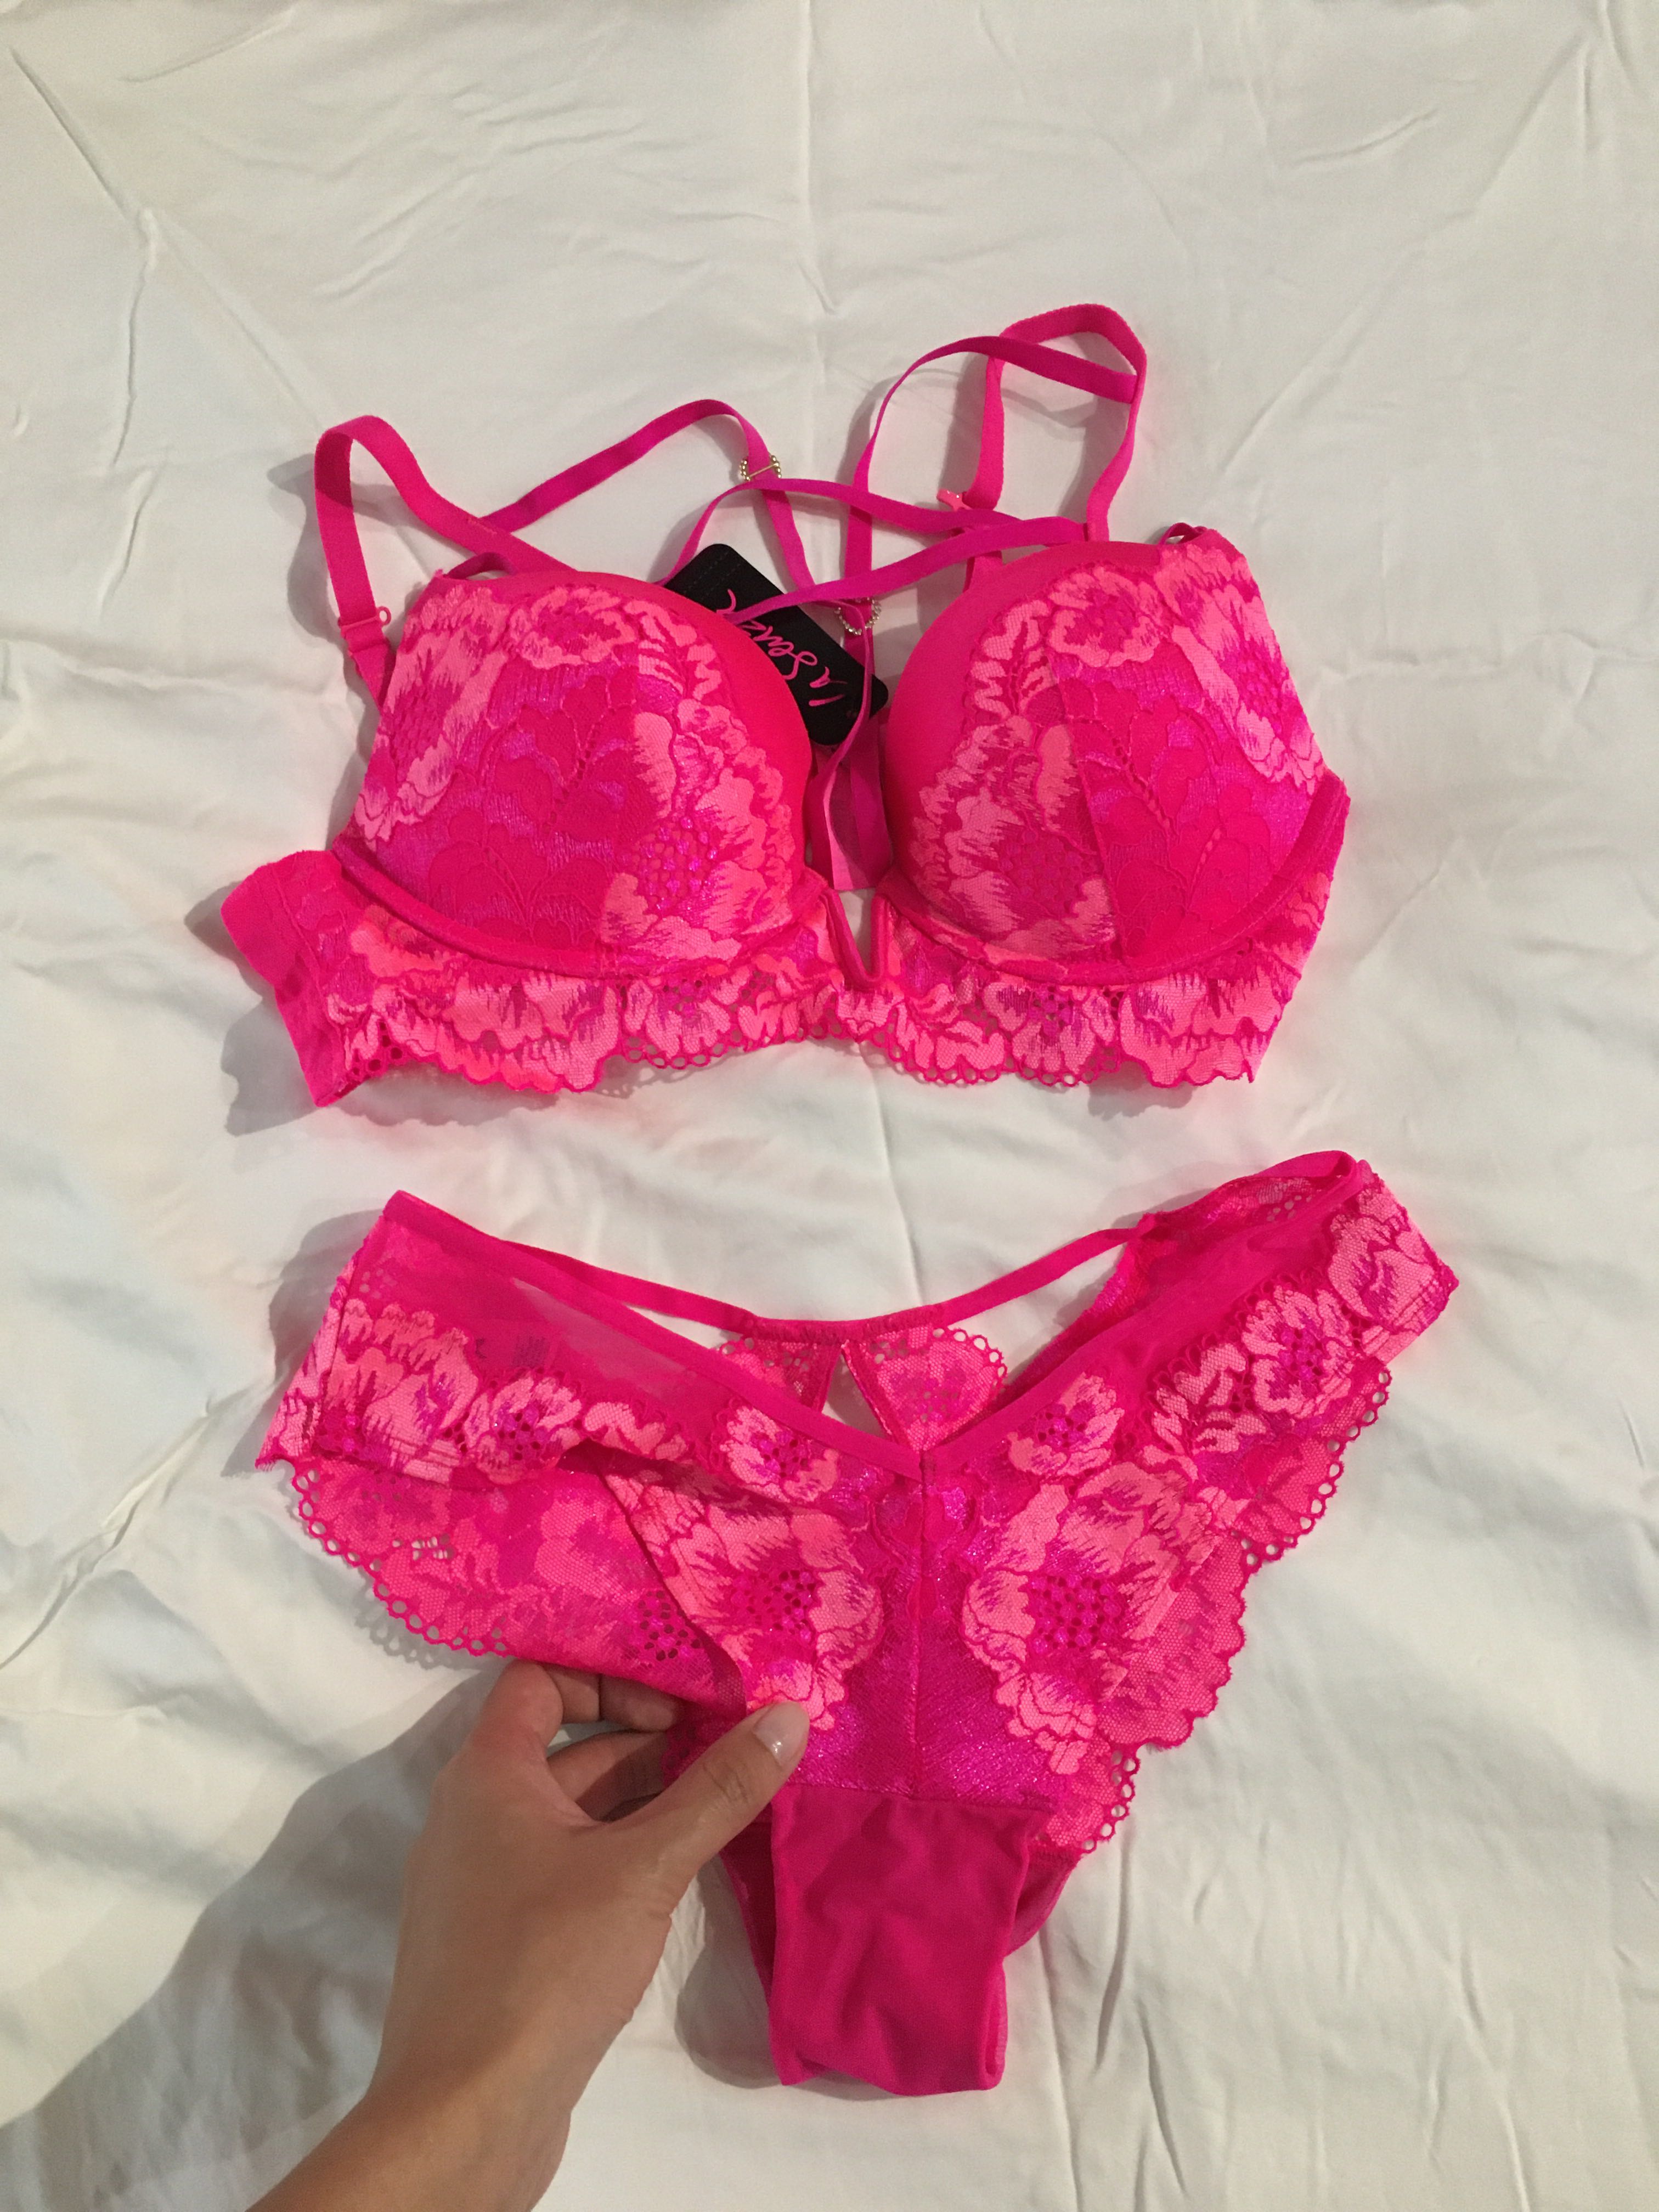 La Senza - When your bra & panty set is AMAZING! 💕 Plus, Club Members get  this bra for only $25 now! SHOP NOW